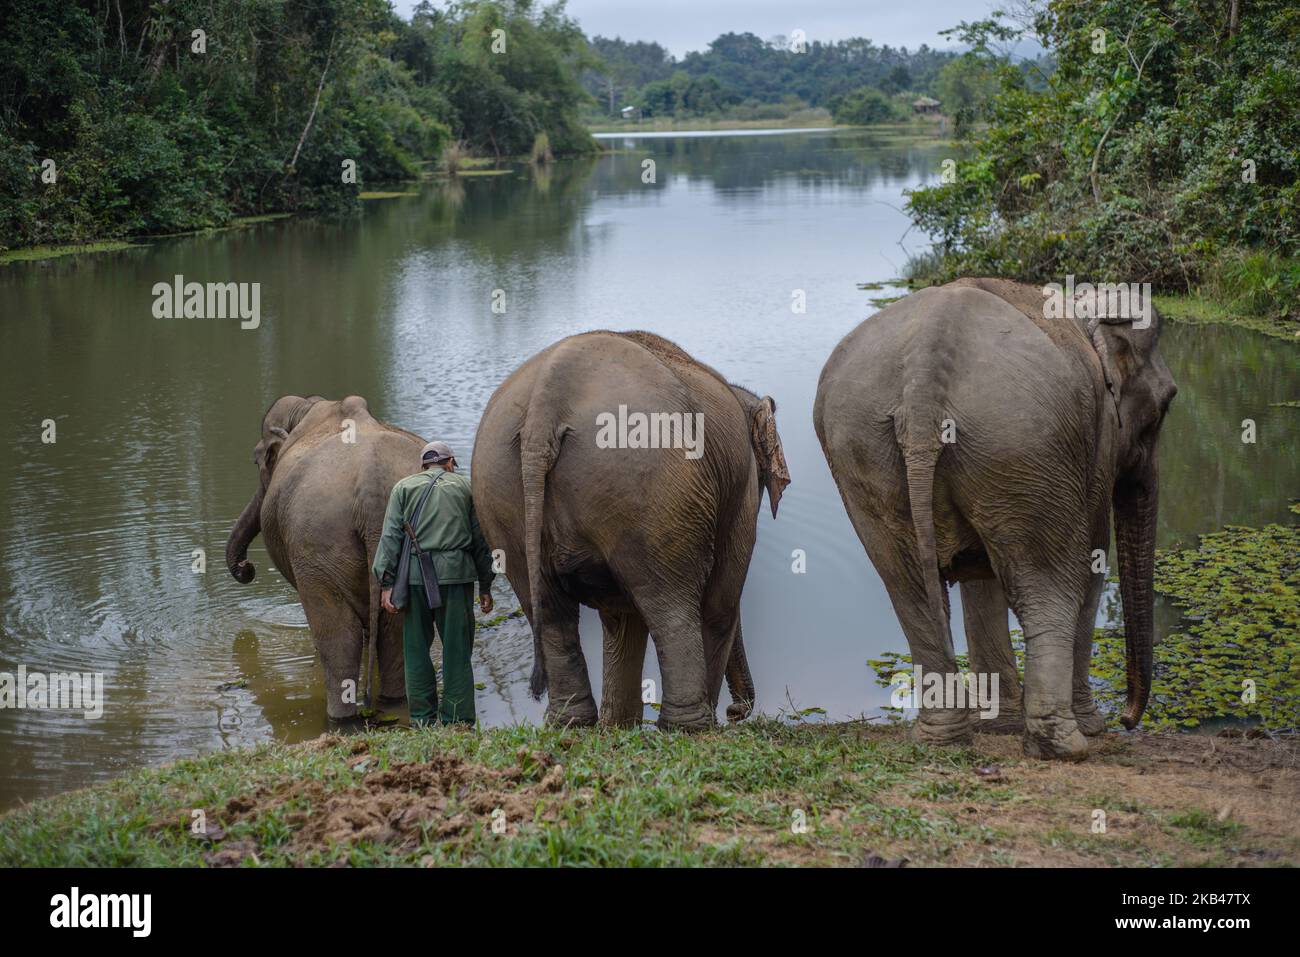 An elephant at the water hole in the Elephant Conservation Center, Sayaboury, Laos, in December 2018. Laos was known as ‘The land of a million elephants’ in the past, today the elephant population in the country stands at around 800 individuals. Half of them is made up of captive elephants, and their number is in decline; the owners are not interested in breeding animals (the cow needs at least four years out of work during her pregnancy and lactation), illegal trafficking to China and other neighboring countries continues. Against this backdrop, the Elephant Conservation Center is the only on Stock Photo